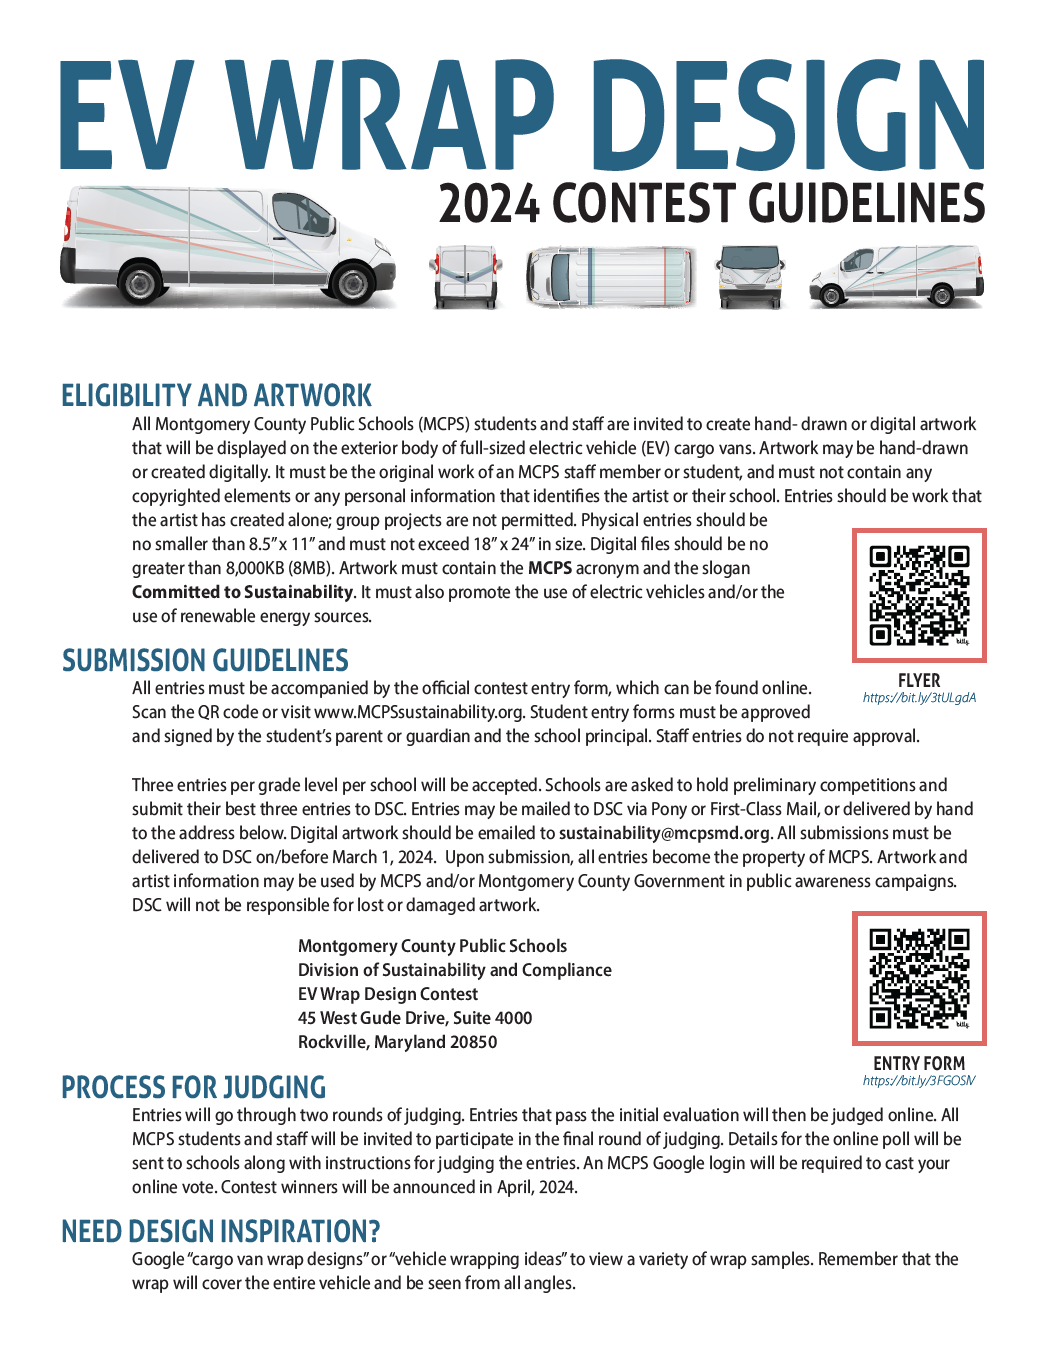 picture of the contest guidelines flyer